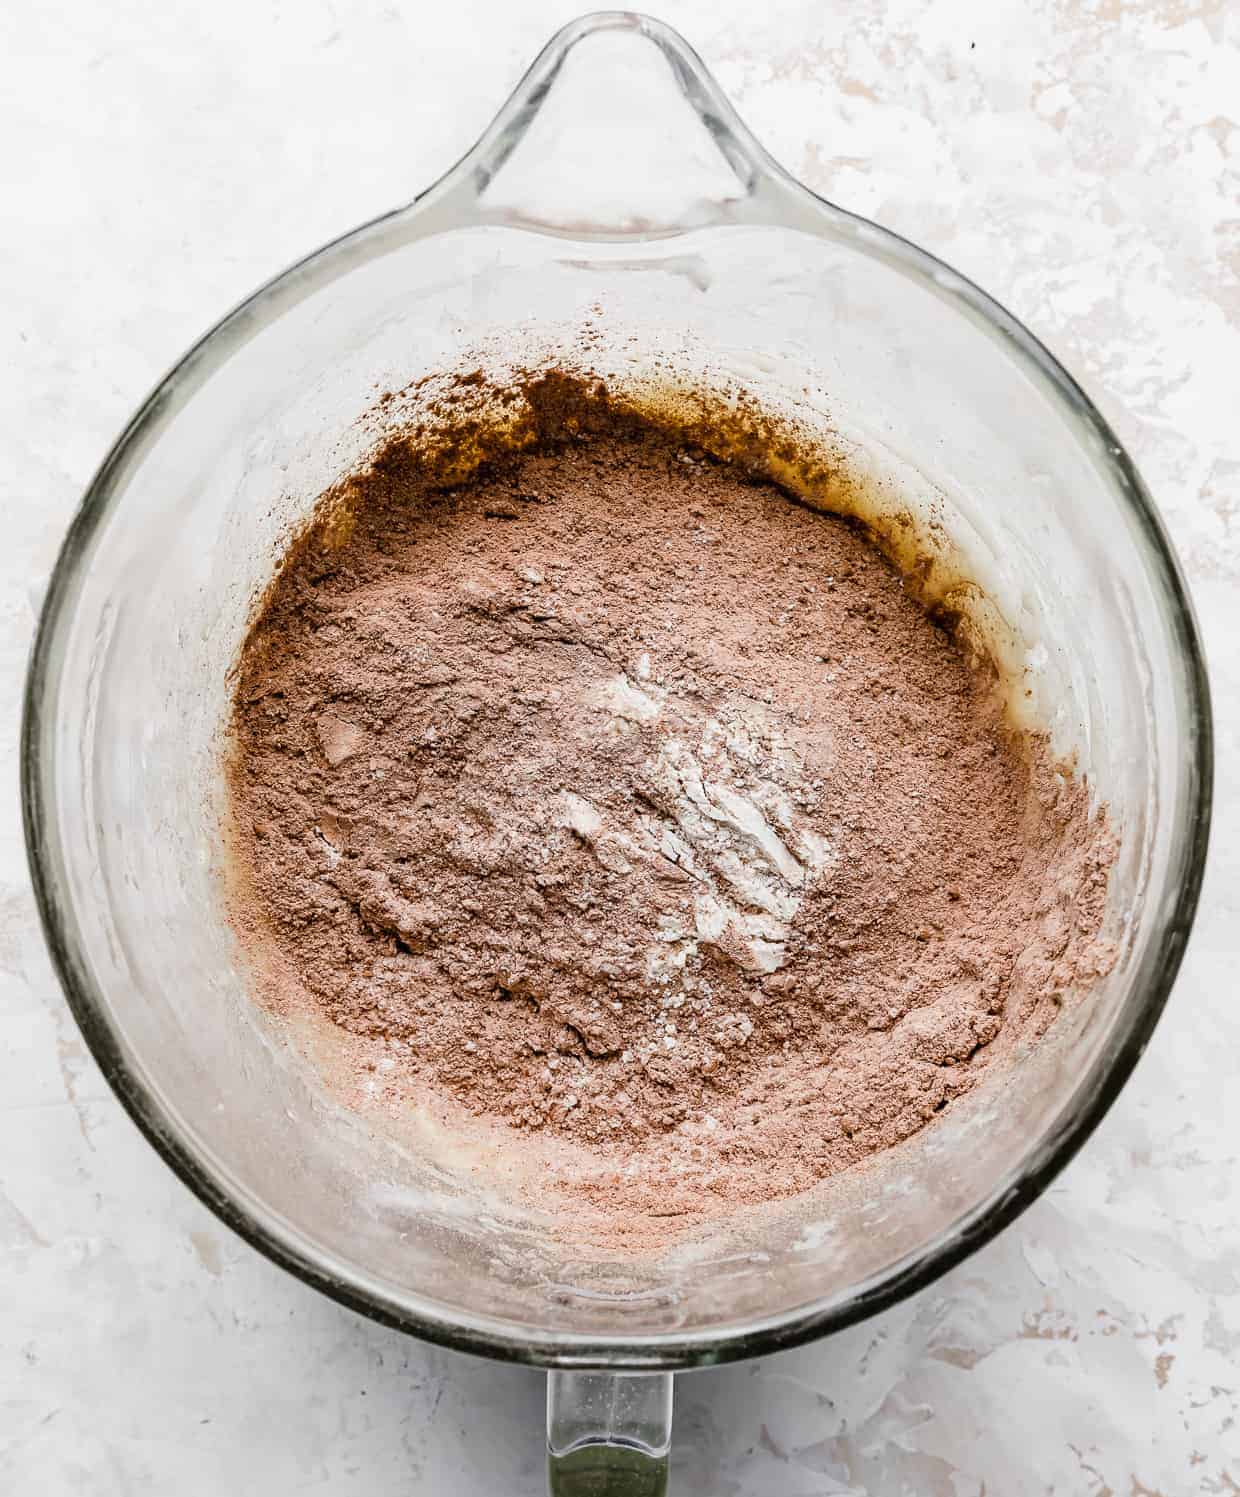 Cocoa powder mixed with flour in a glass stand mixer bowl.